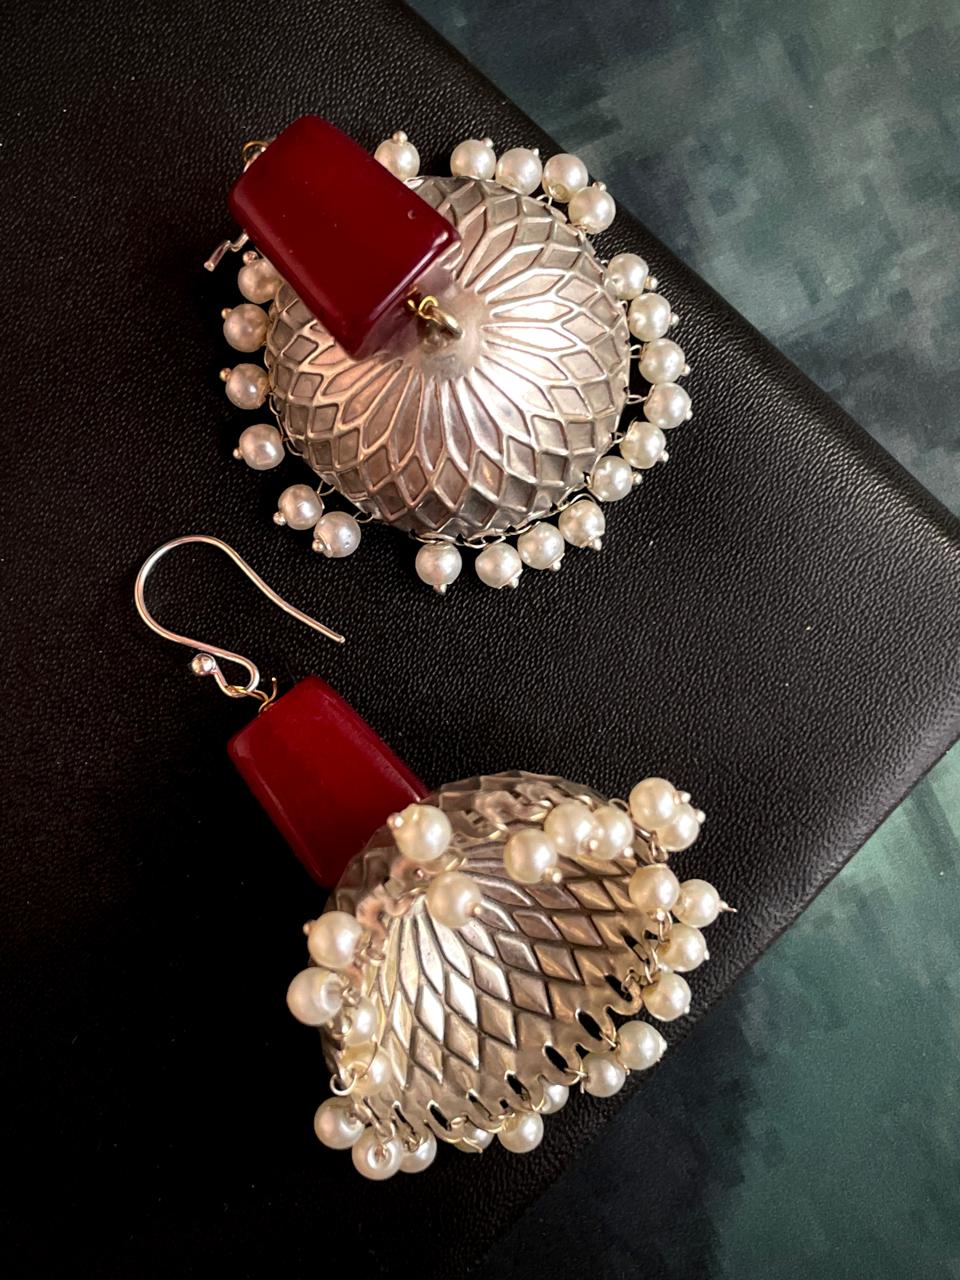 Fibre Beads and Antique Look Silver Replica Jhumka Earring